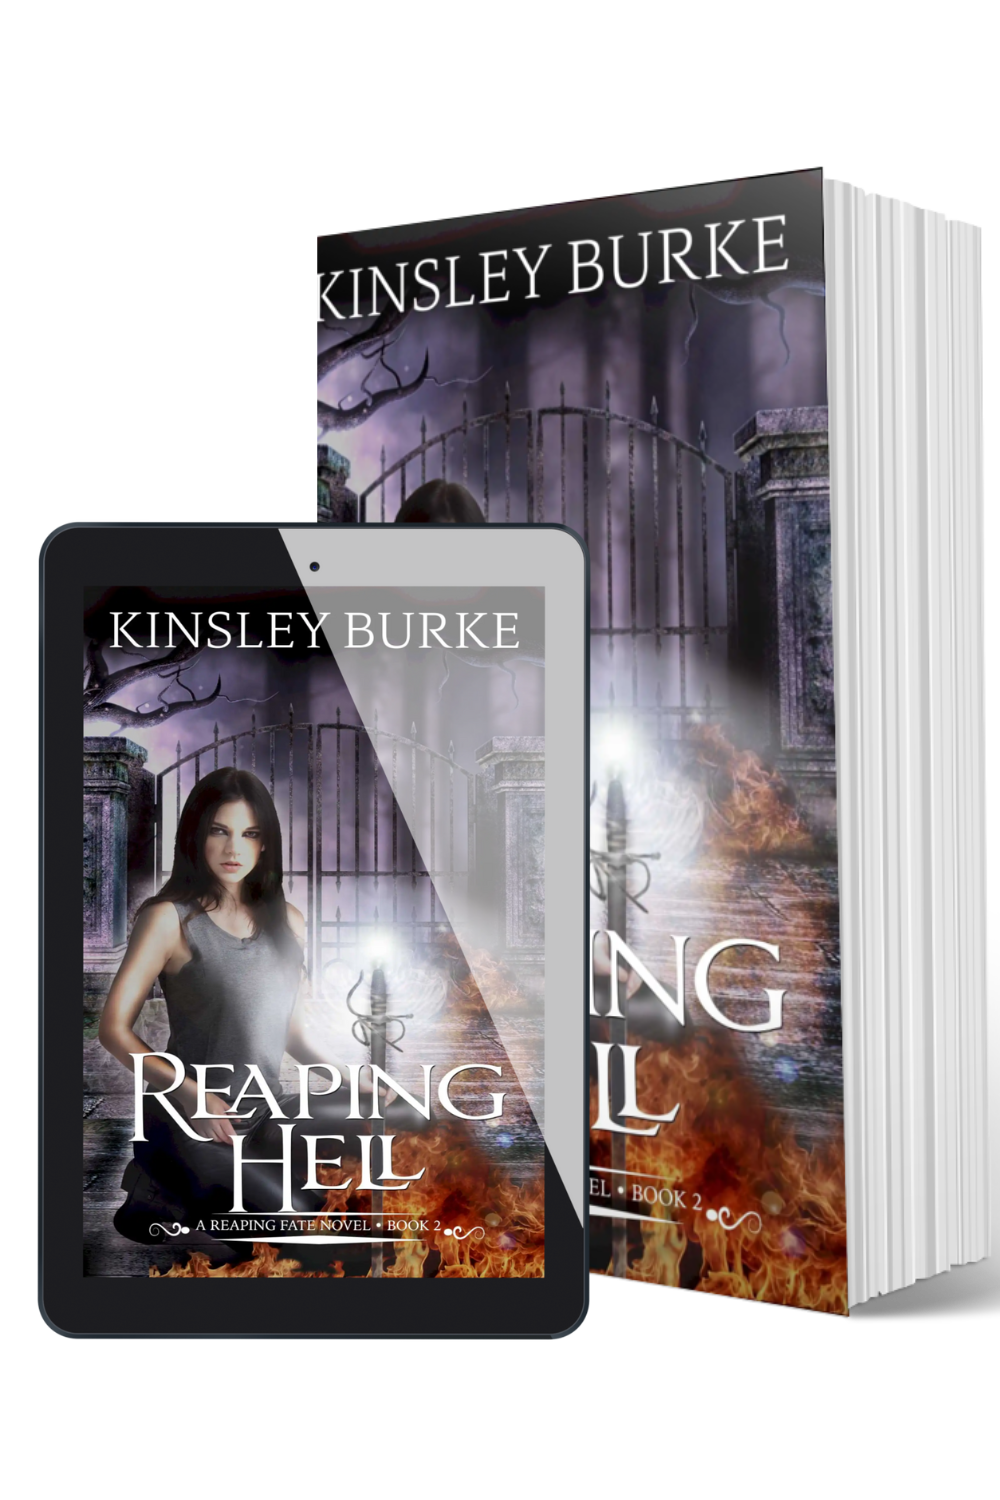 Cover image of Reaping Hell book 2 by Kinsley Burke